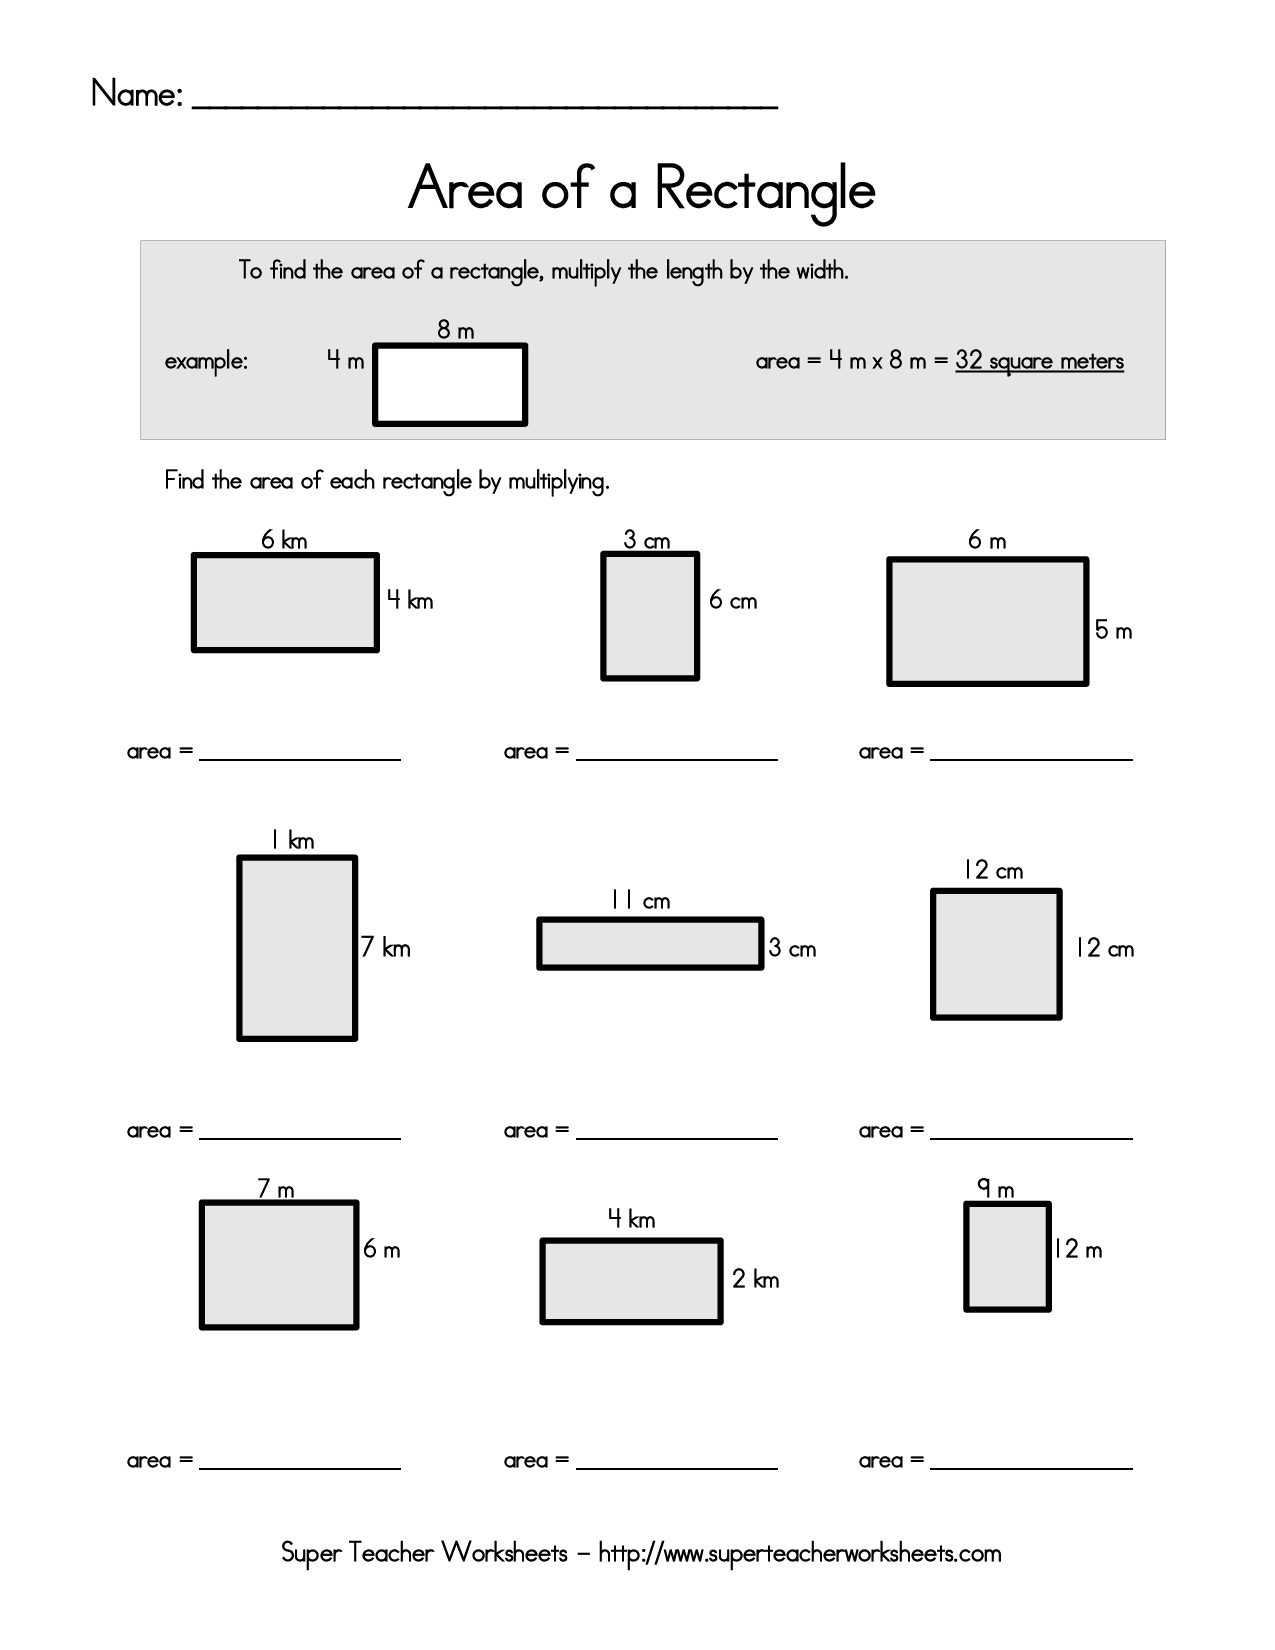 6-best-images-of-area-of-a-rectangle-worksheet-rectangle-area-and